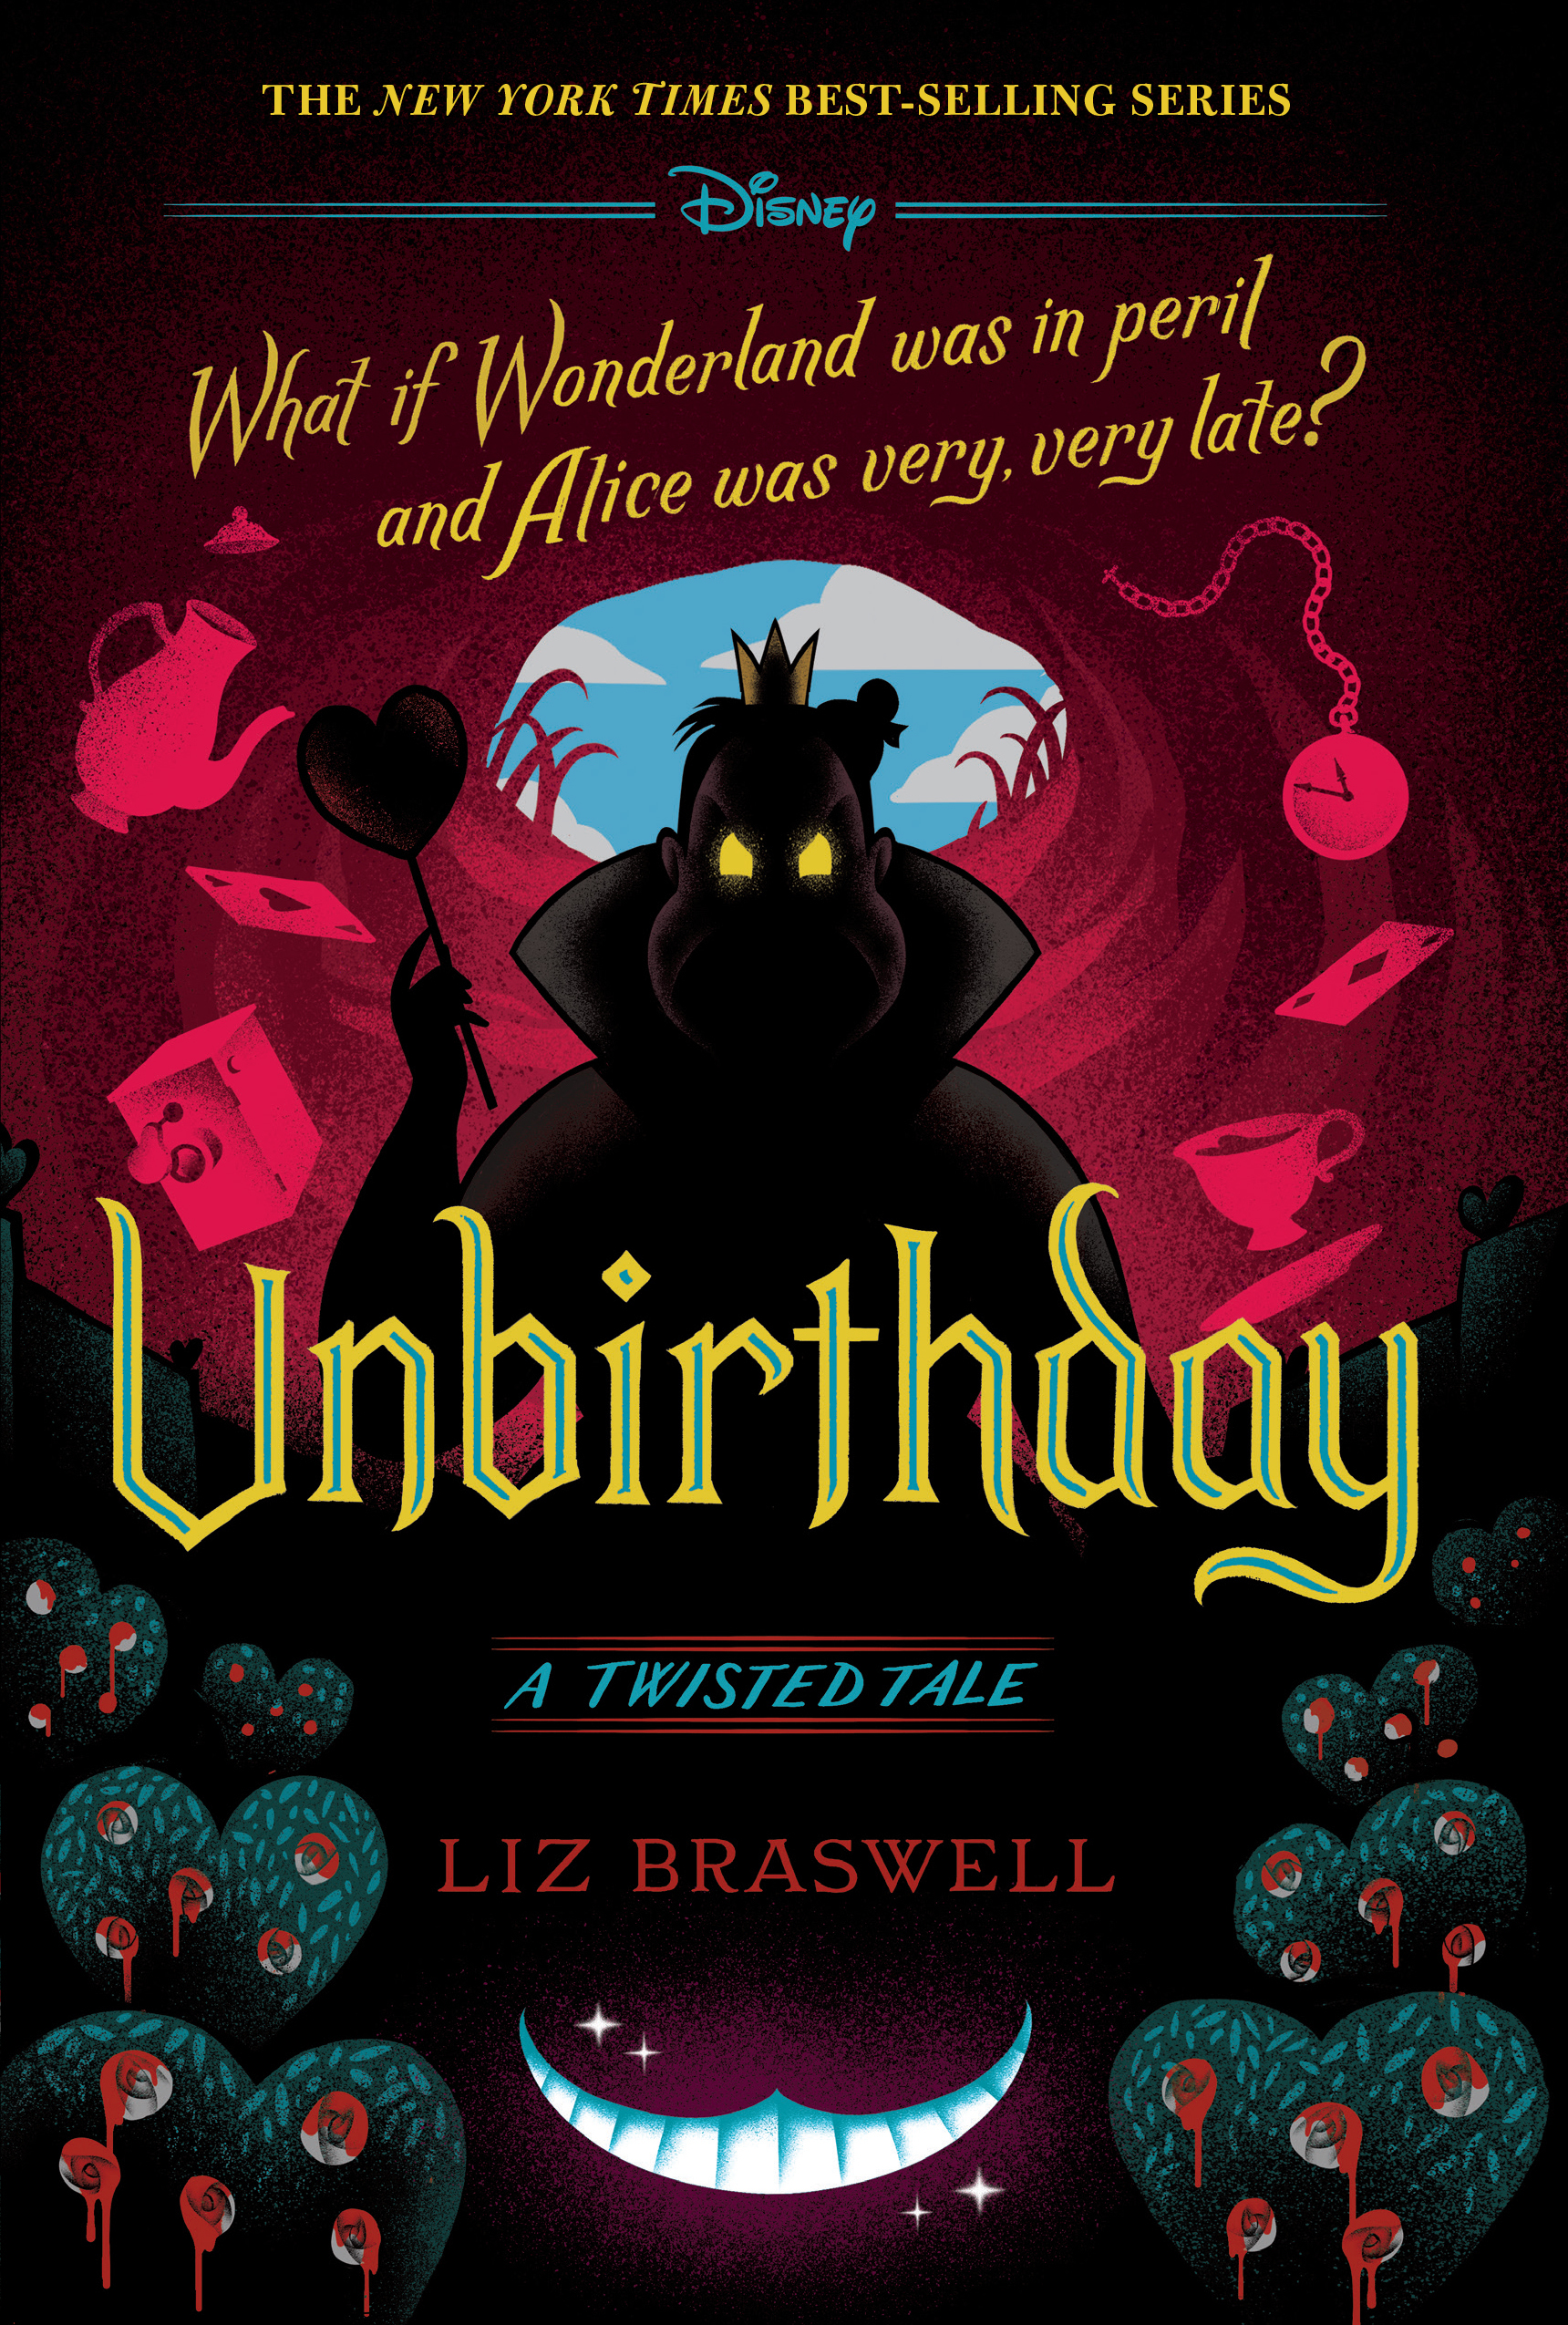 Unbirthday A Twisted Tale by Liz Braswell - A Twisted Tale - Alice